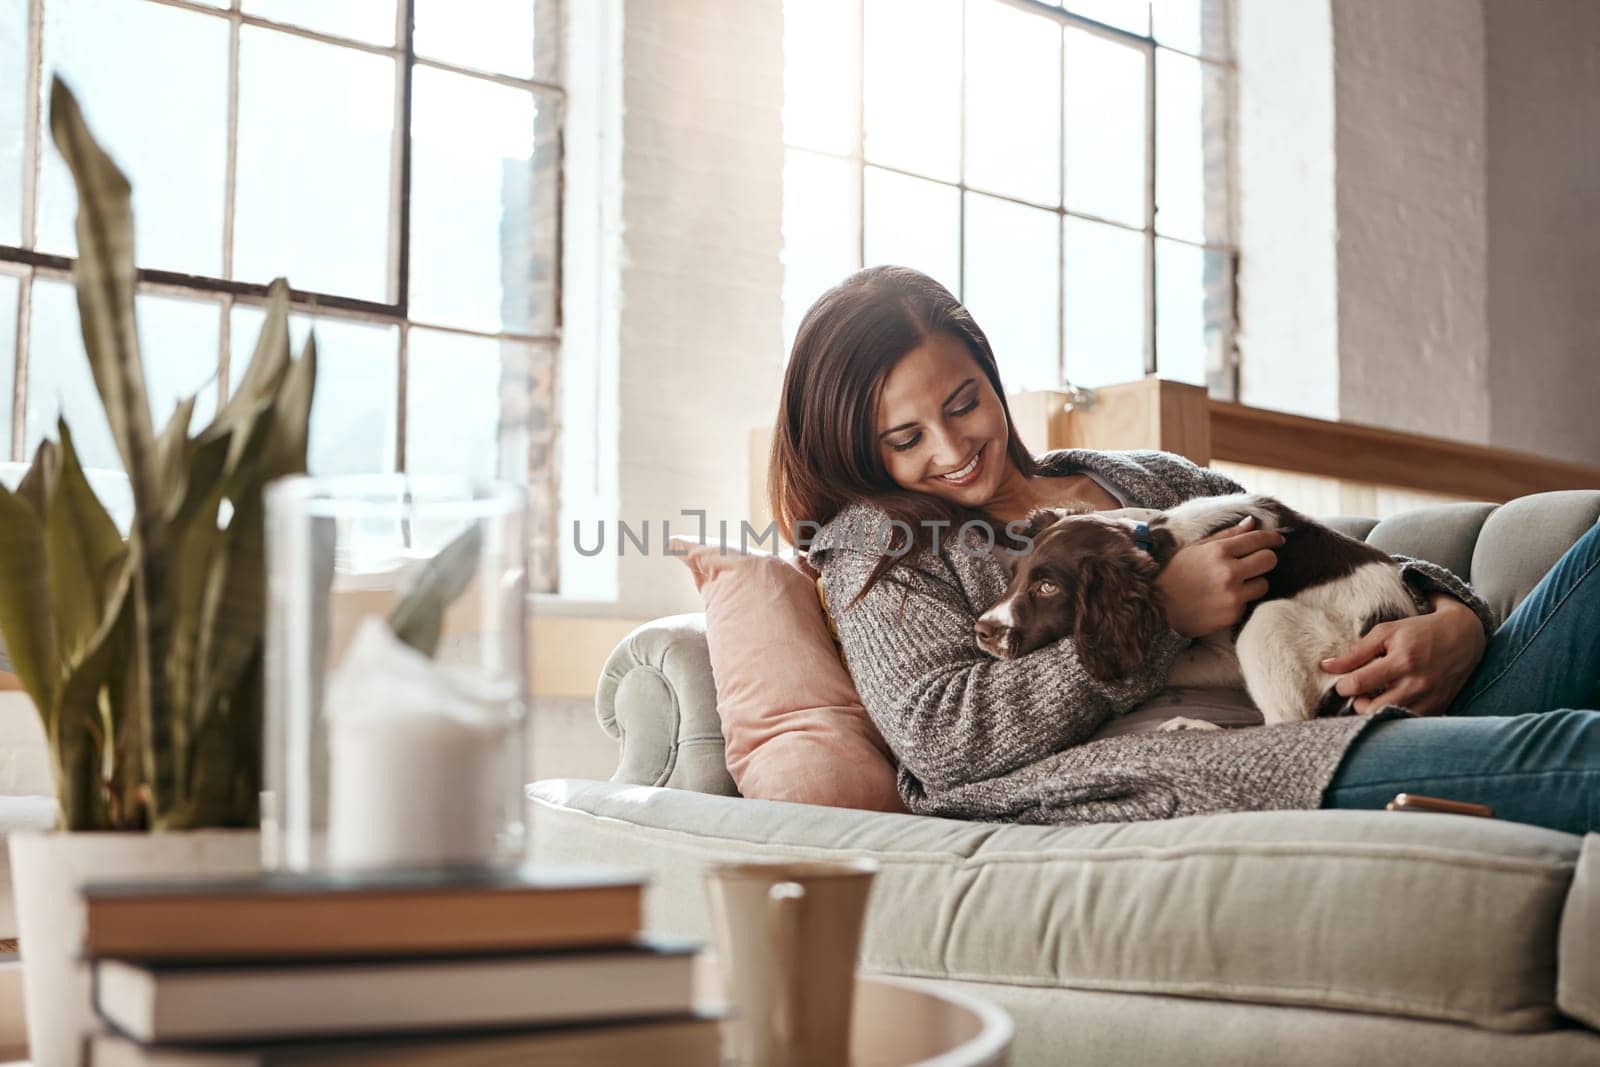 Woman relax on couch with puppy, happy and content at home with pet, happiness together with peace in living room. .Female cuddle dog, love for animals with smile and care, stress relief and comfort by YuriArcurs